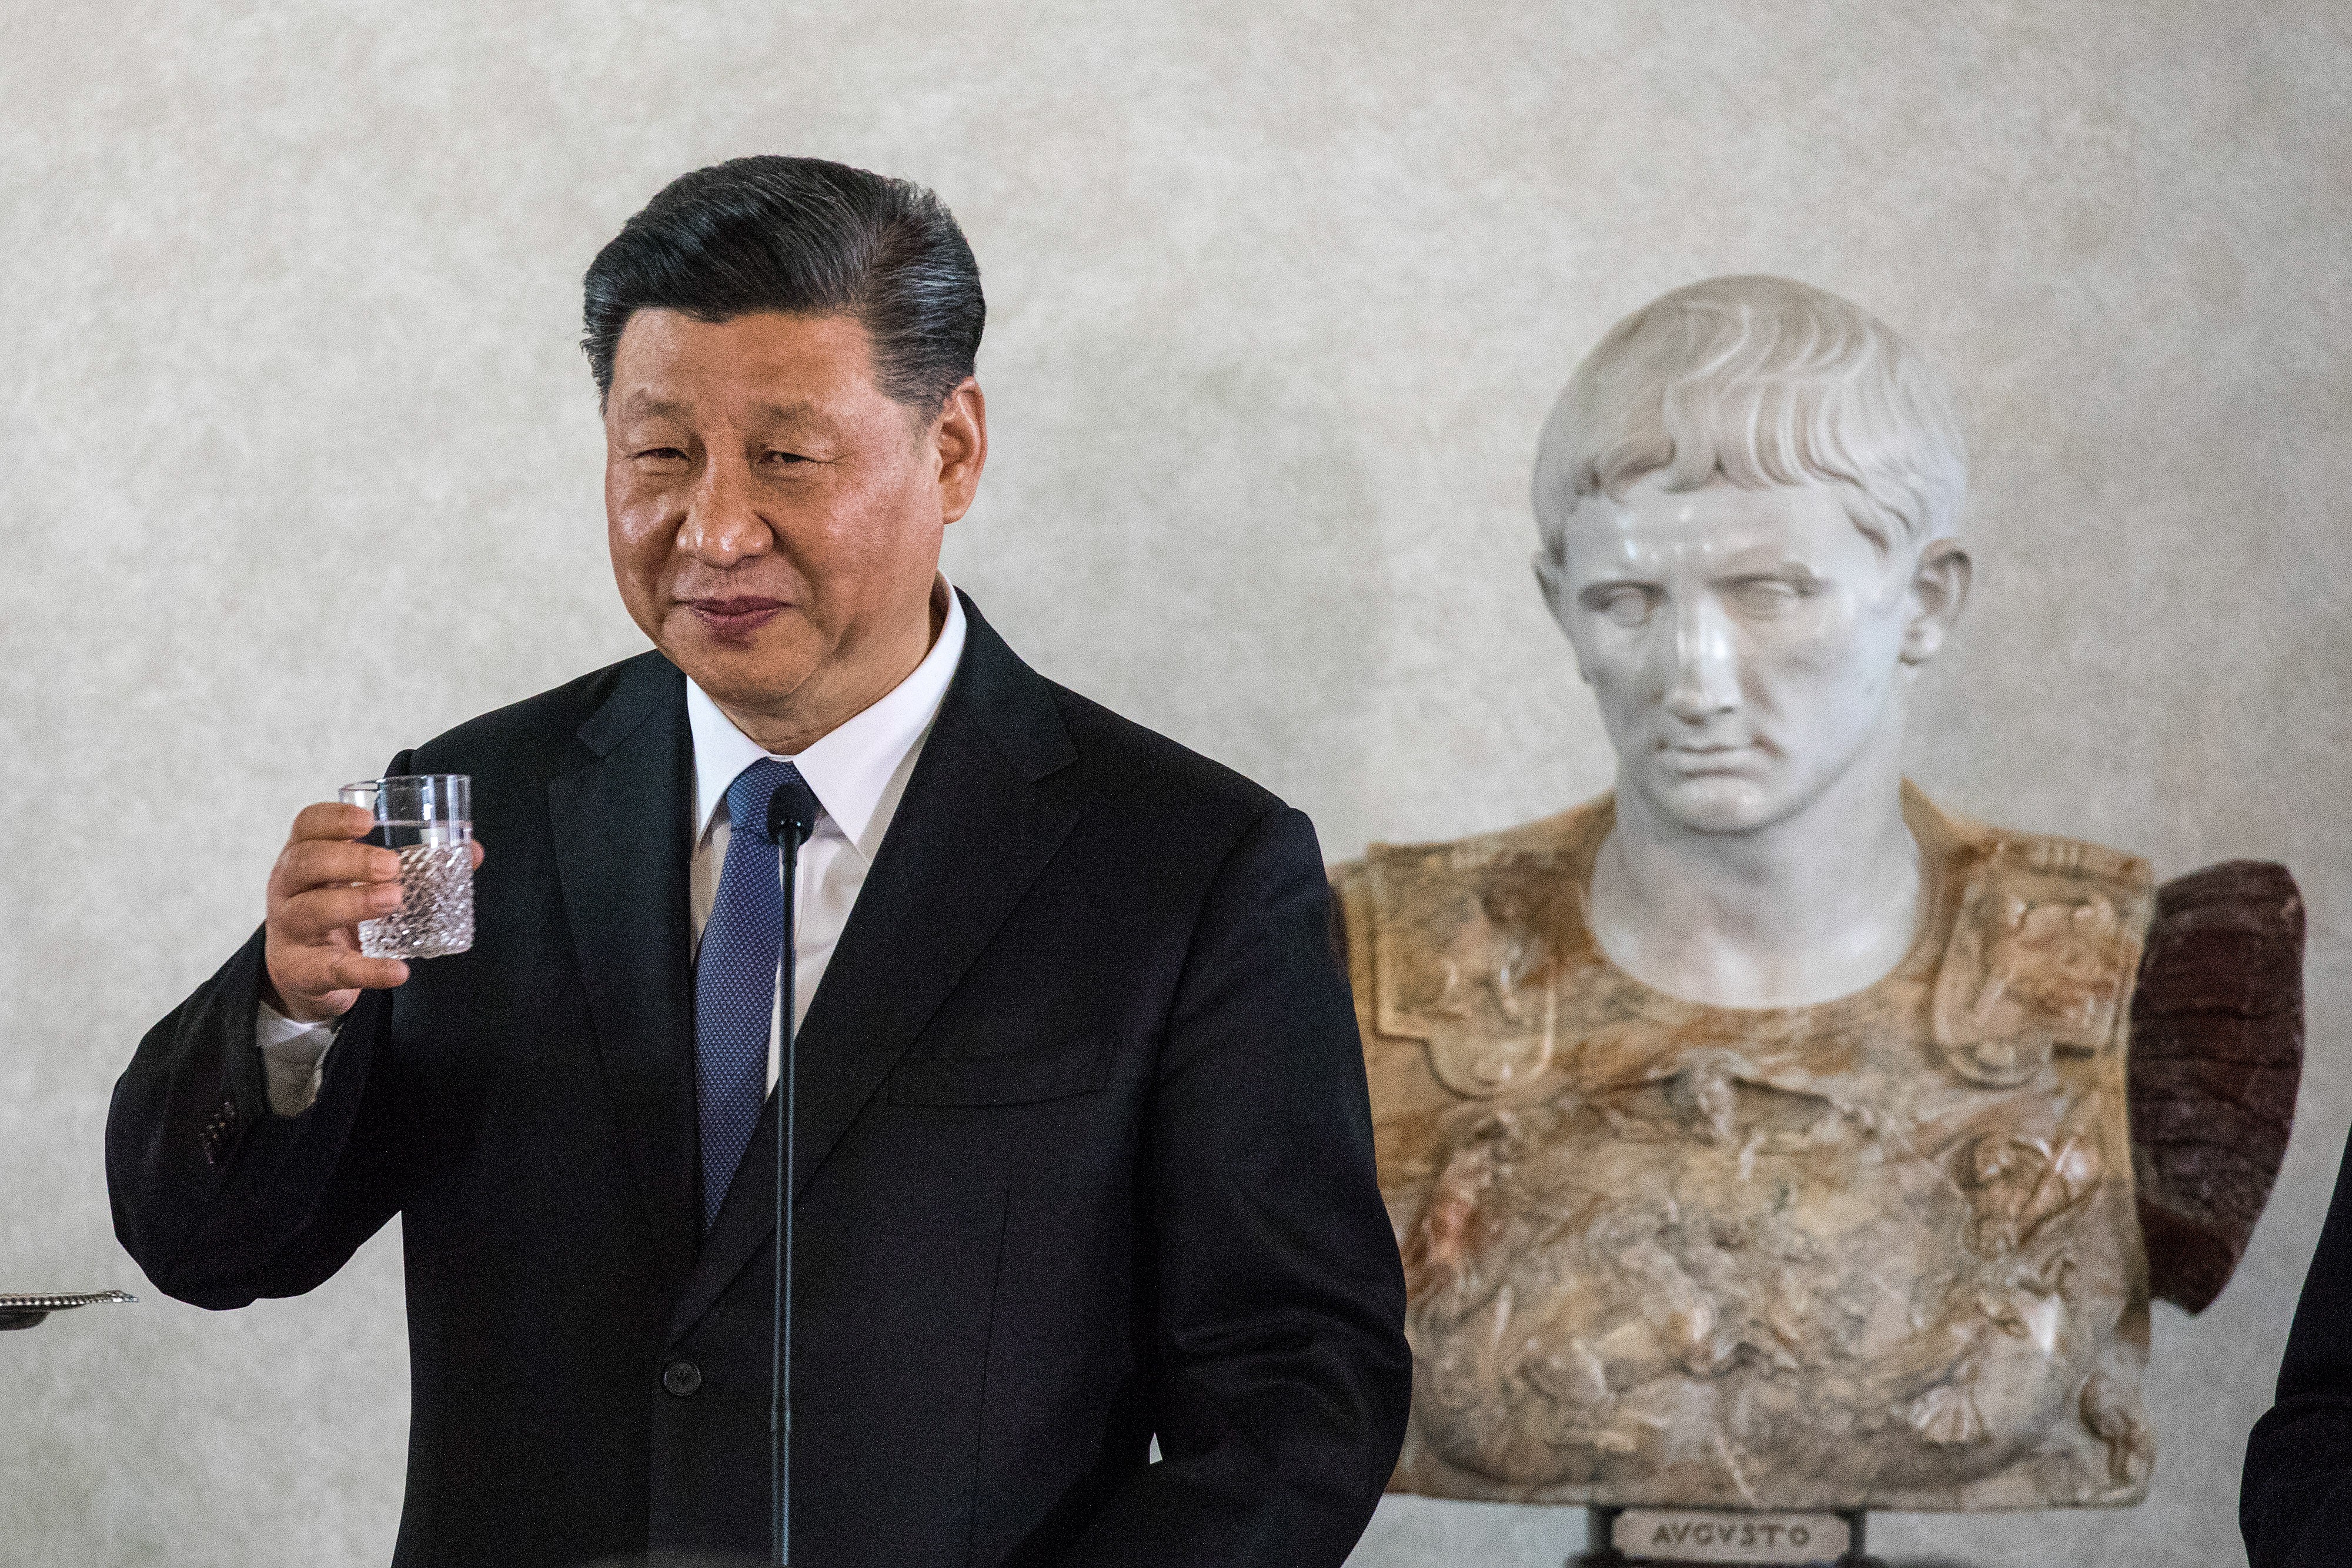 Chinese President Xi Jinping attends a business forum at the Quirinale Palace in Rome, Italy, on March 22. If Europe is disconnected from the opportunities generated by Chinese innovation, the continent could really become a museum. Photo: Bloomberg